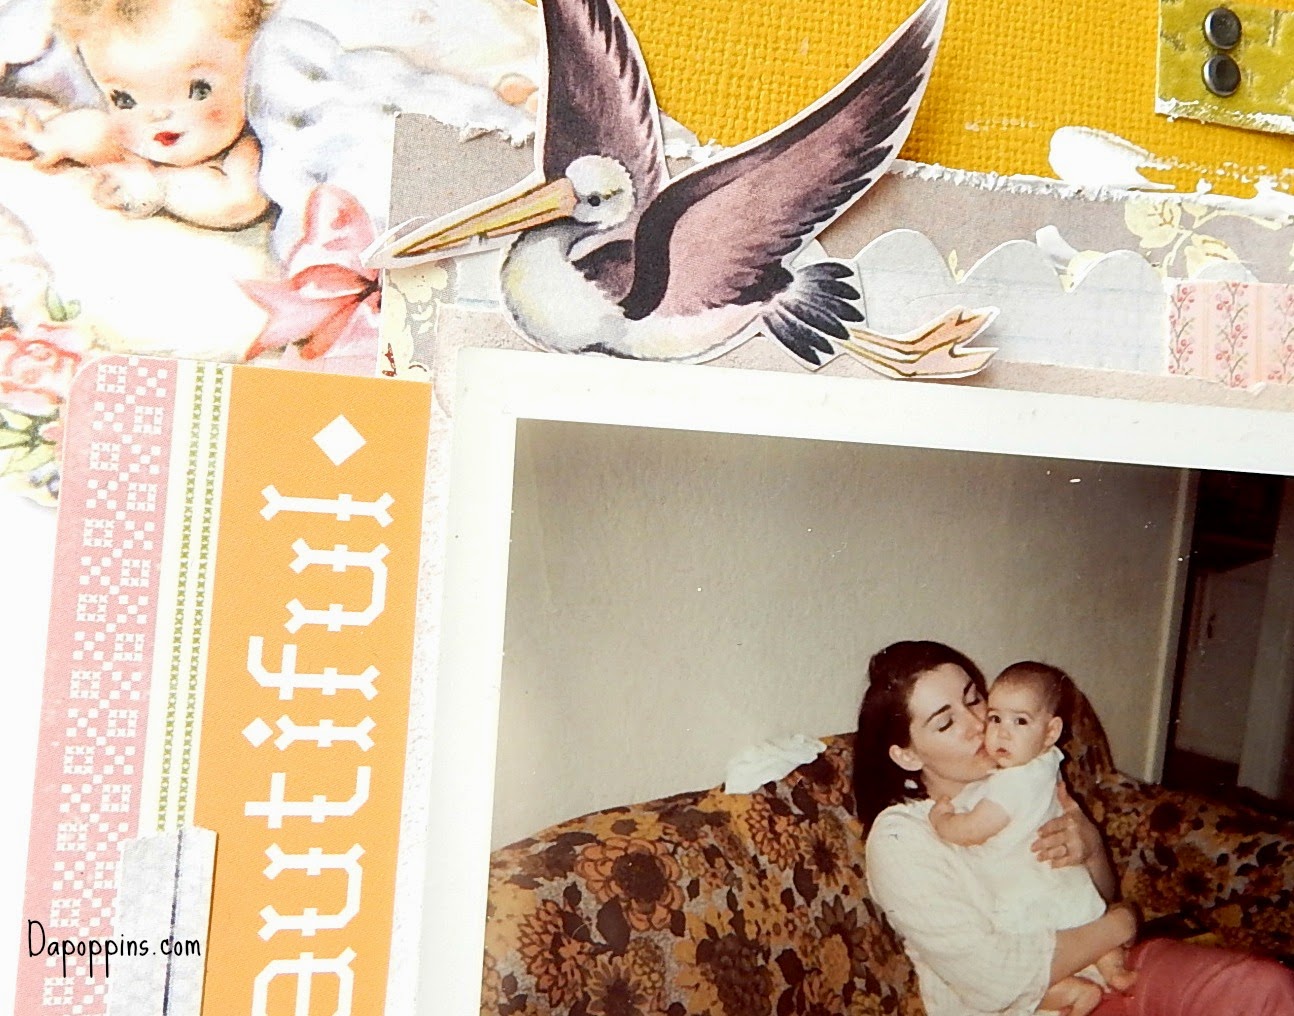 ugliest couch, Mom & Me, old photo's, dapoppins